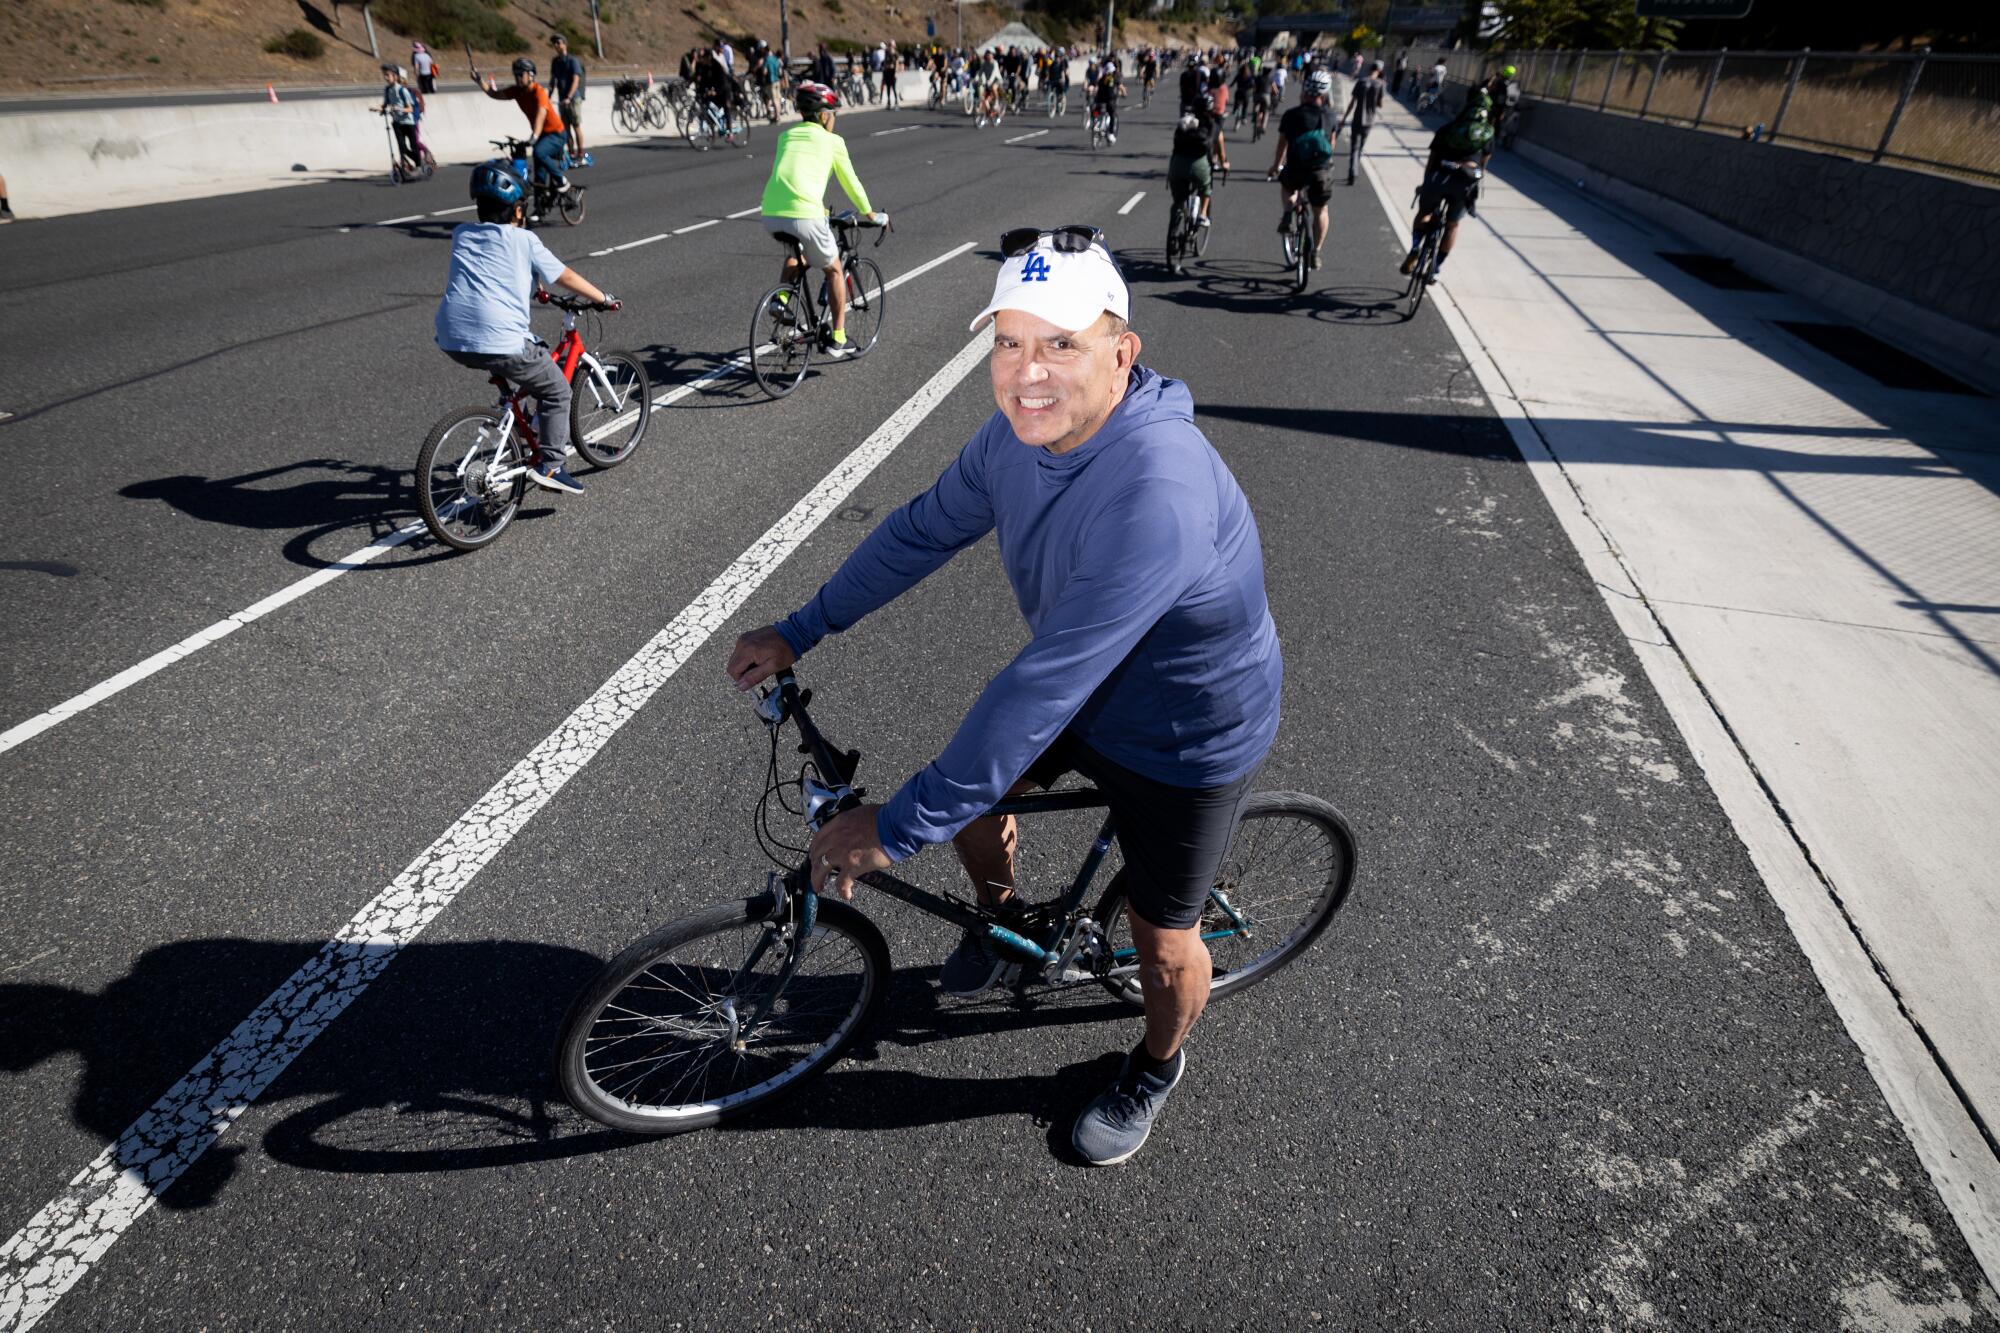 Raul Salinas, 63, of Pasadena, takes a break in the middle of the 110 Freeway